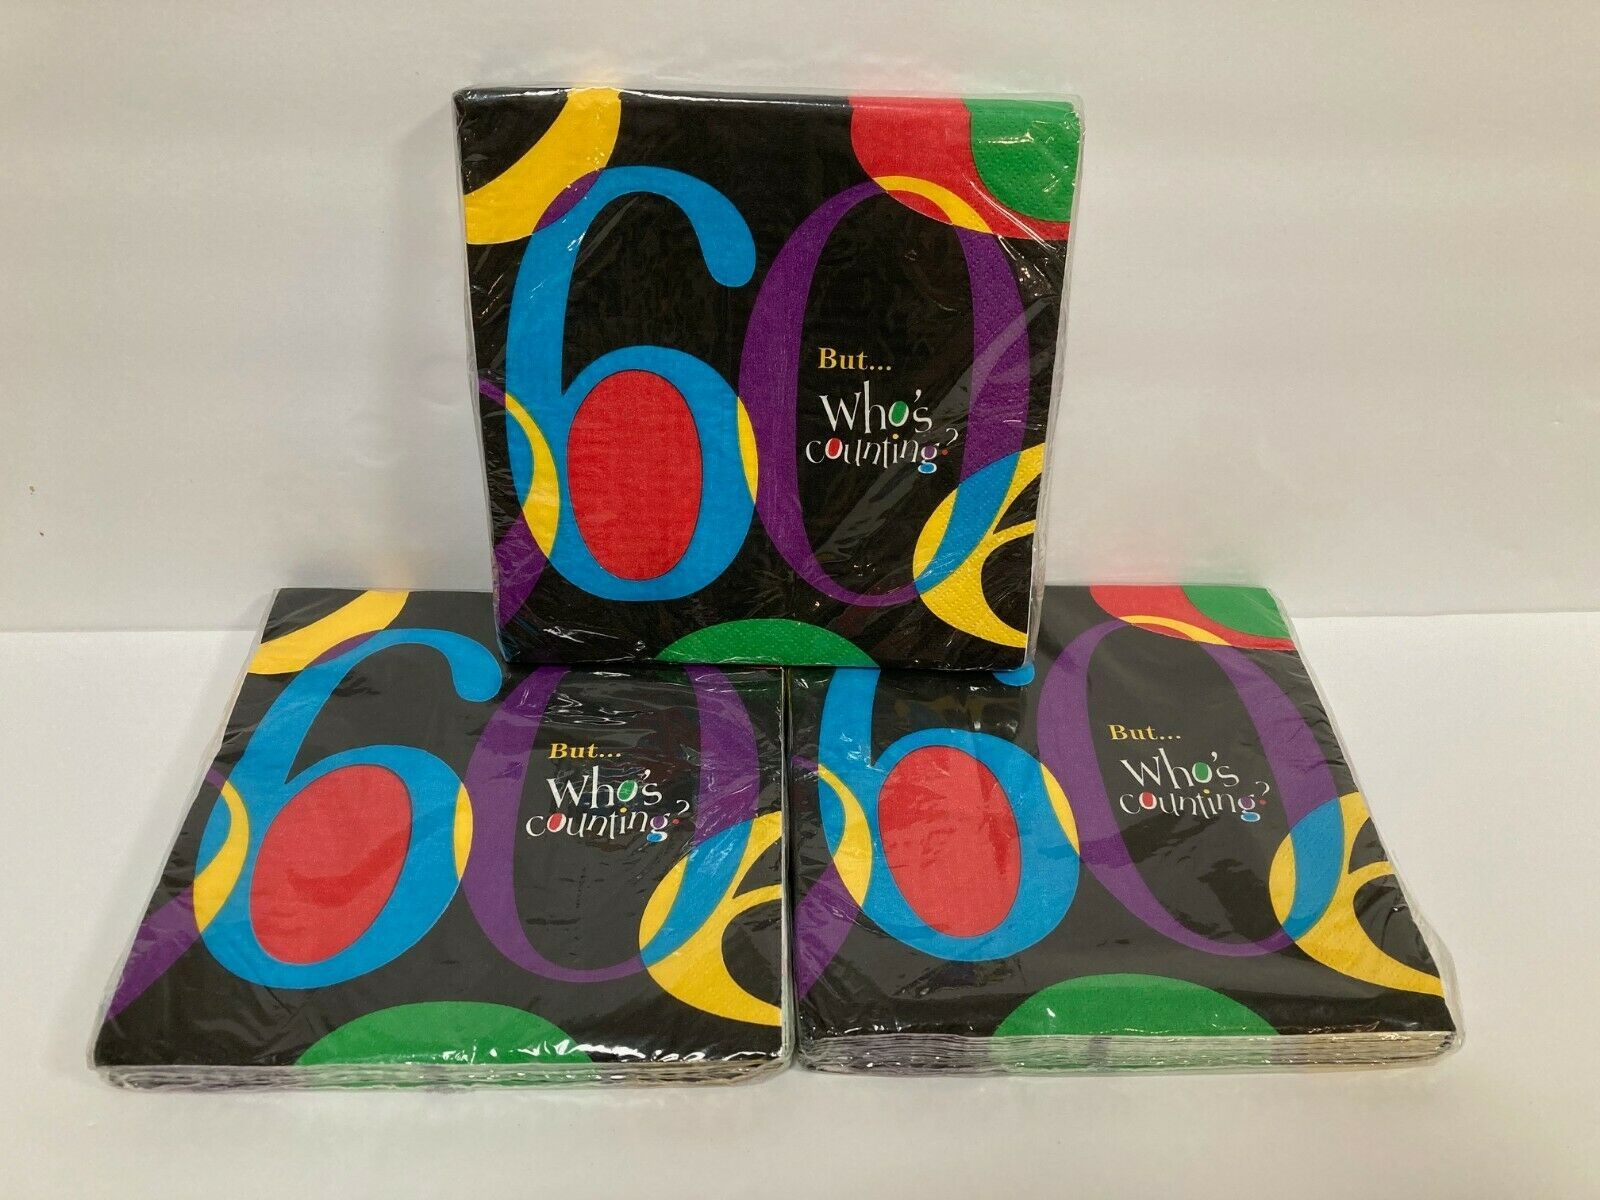 60th Birthday Party Napkins - But...Who's Counting?  3 New Packages 16 each pack - $5.00